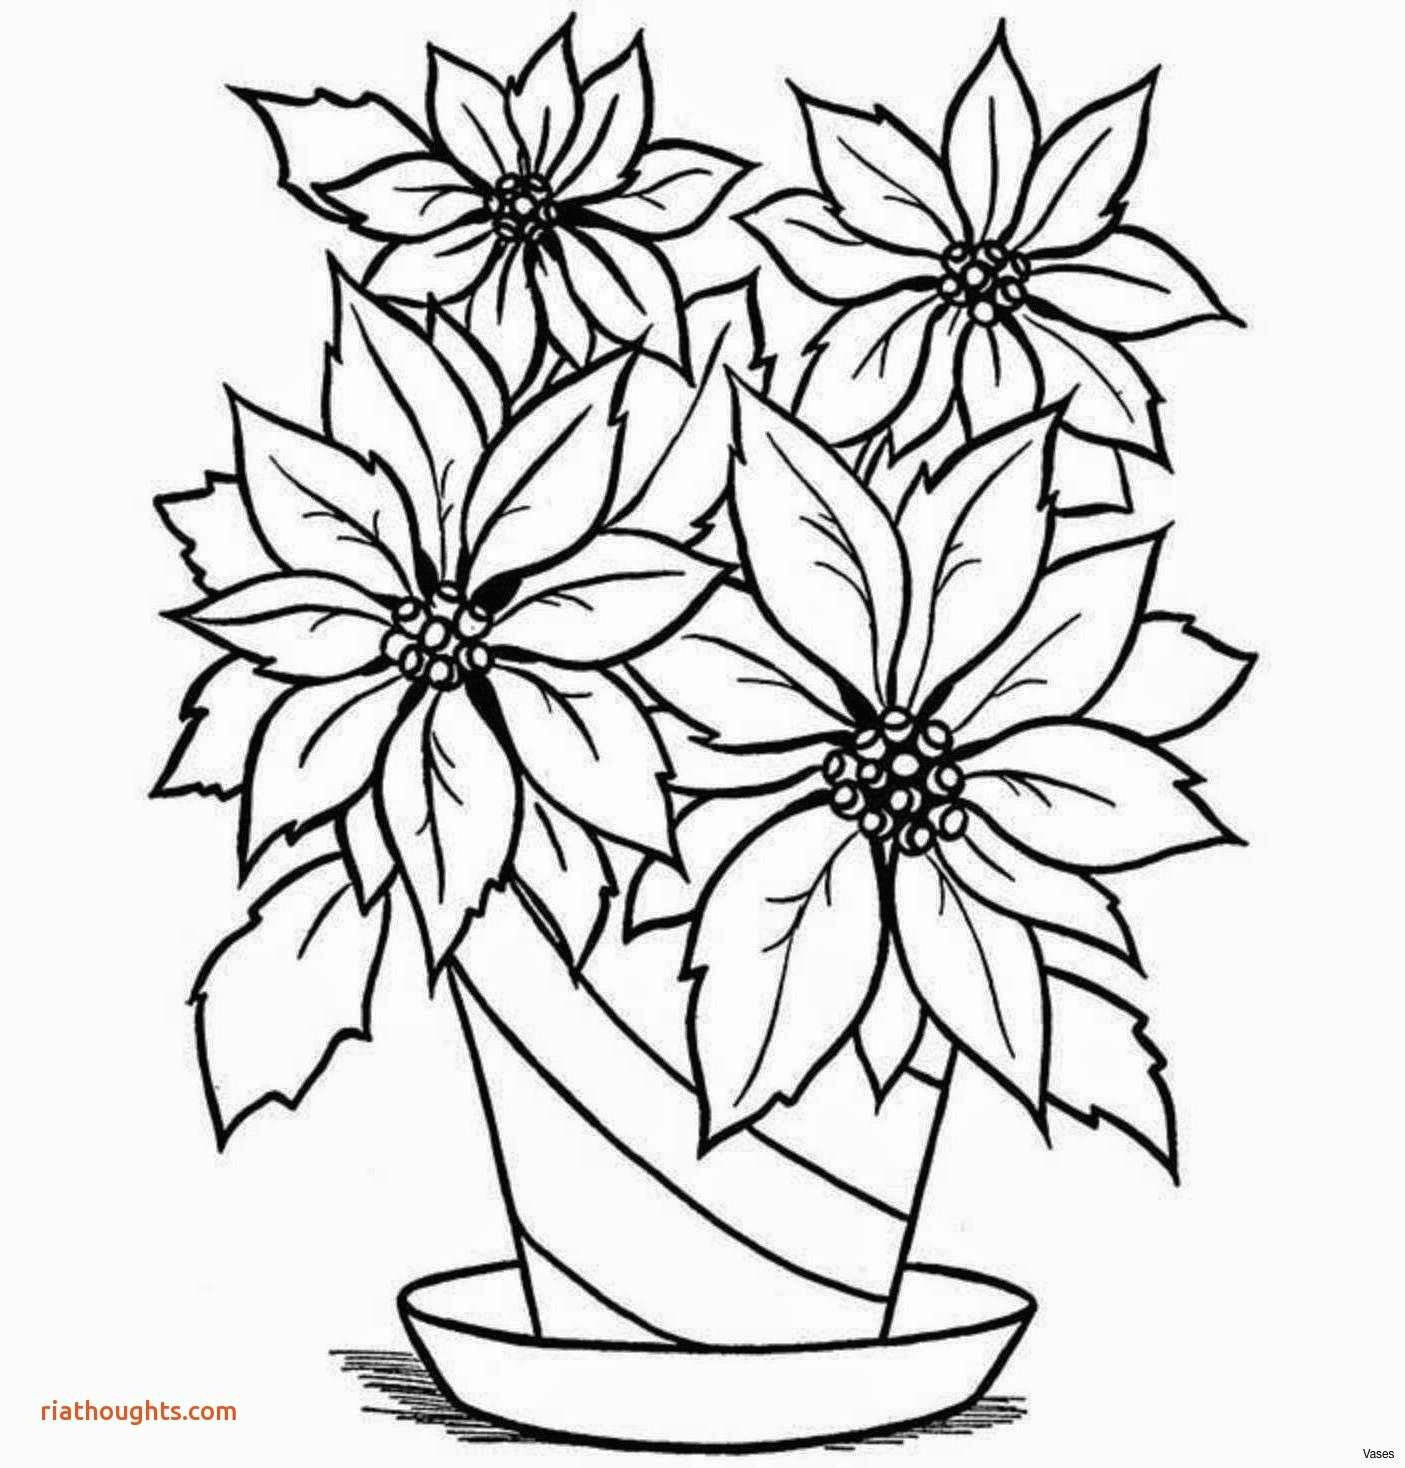 Drawing A Picture Of Flowers 25 Fancy Draw A Flower Helpsite Us